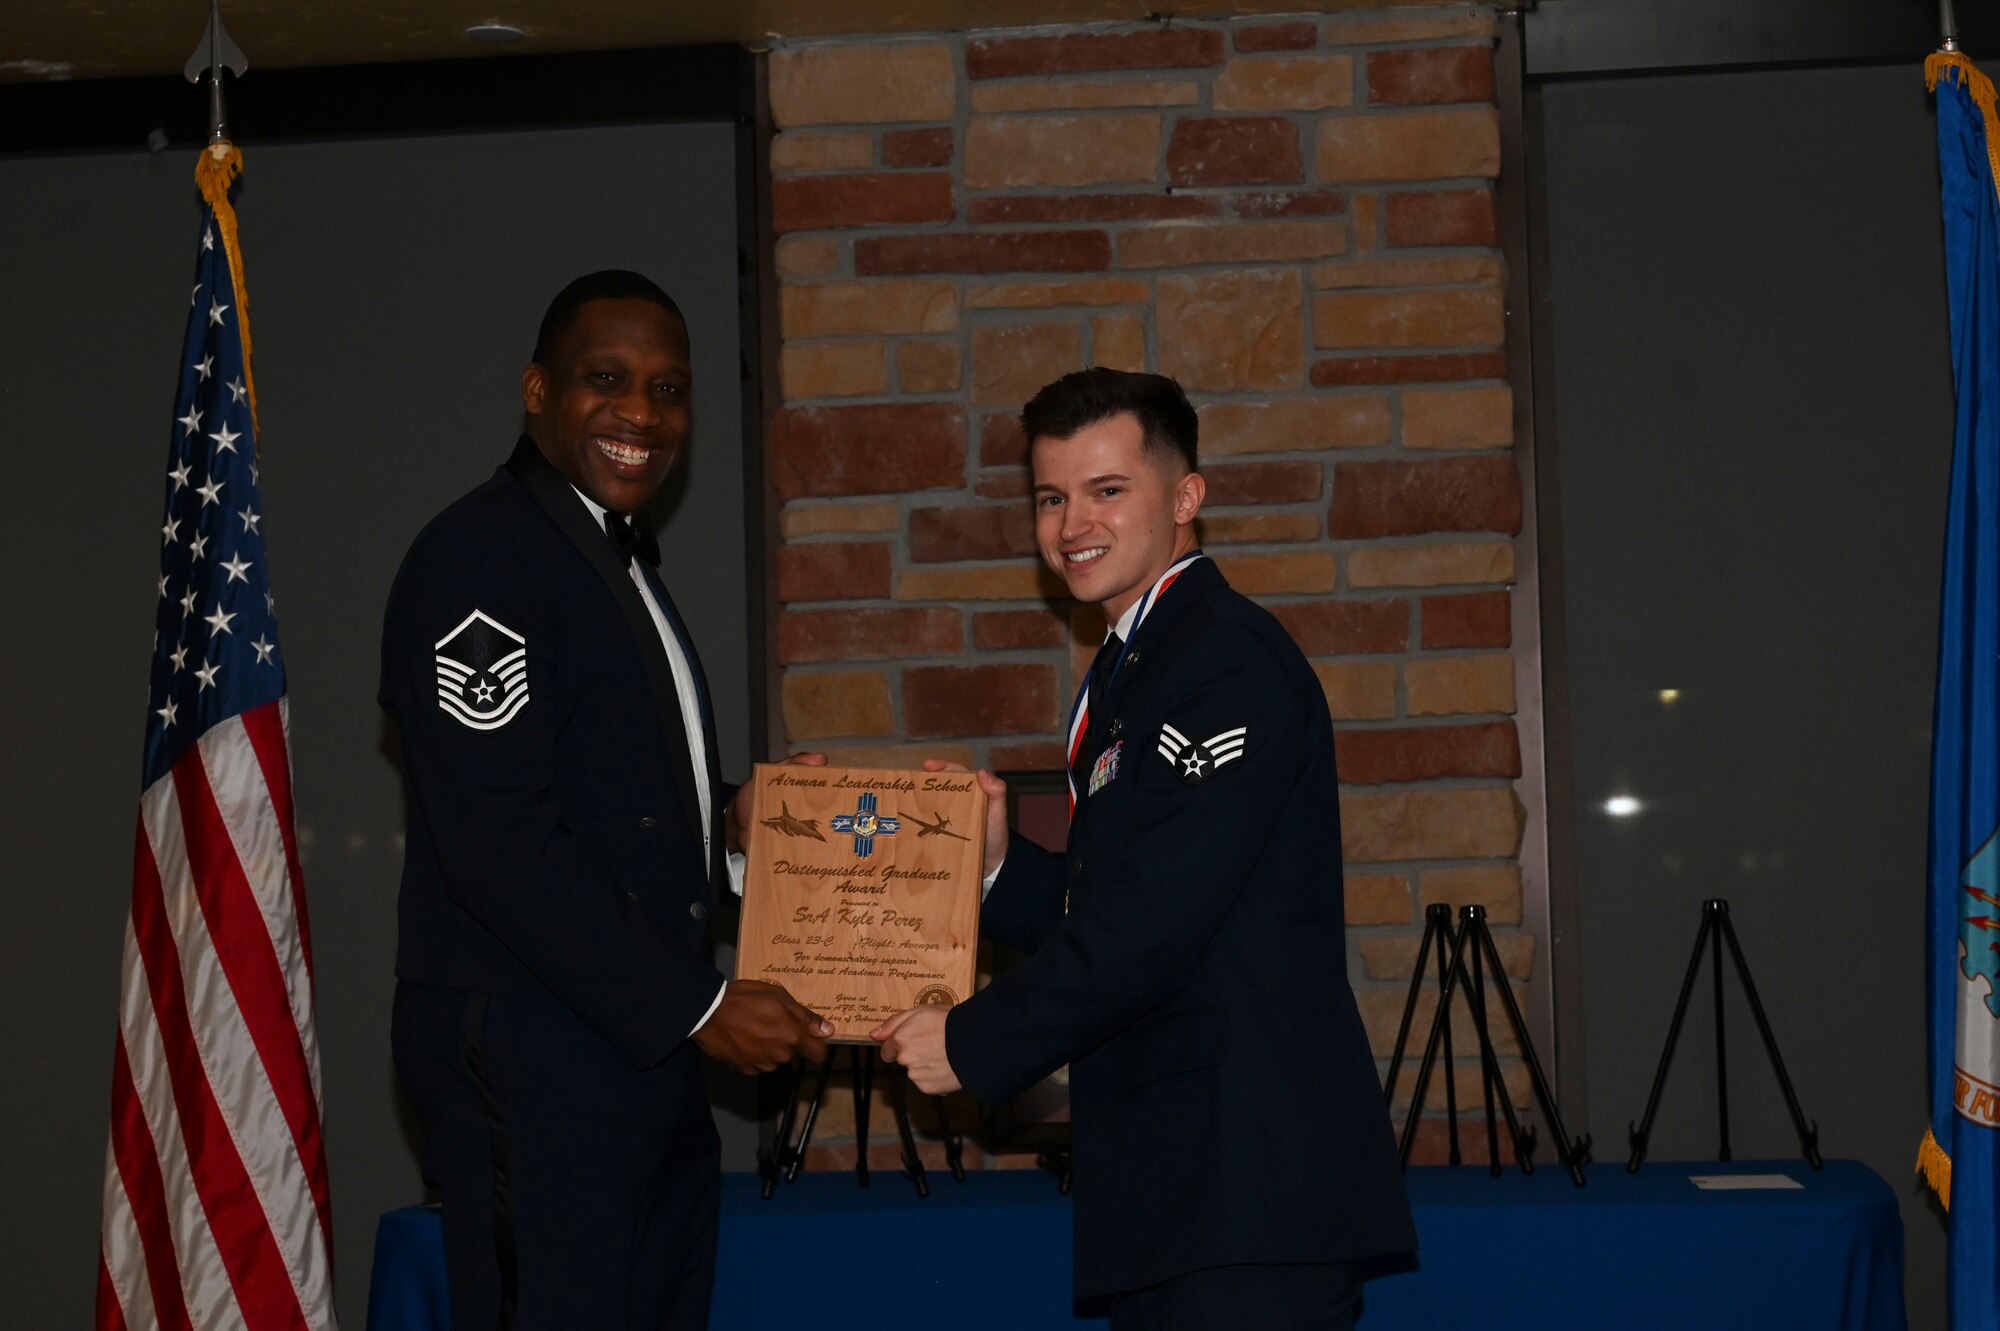 Senior Airman Kyle Perez, 49th Civil Engineer Squadron, Airman Leadership School graduate, accepts the distinguished graduate award during the graduation of ALS class 23-C at Holloman Air Force Base, New Mexico, Feb. 16, 2023. The distinguished graduate award is presented to the top ten-percent of graduates for their performance in academic evaluations and demonstration of leadership. (U.S. Air Force photo by Airman 1st Class Isaiah Pedrazzini)